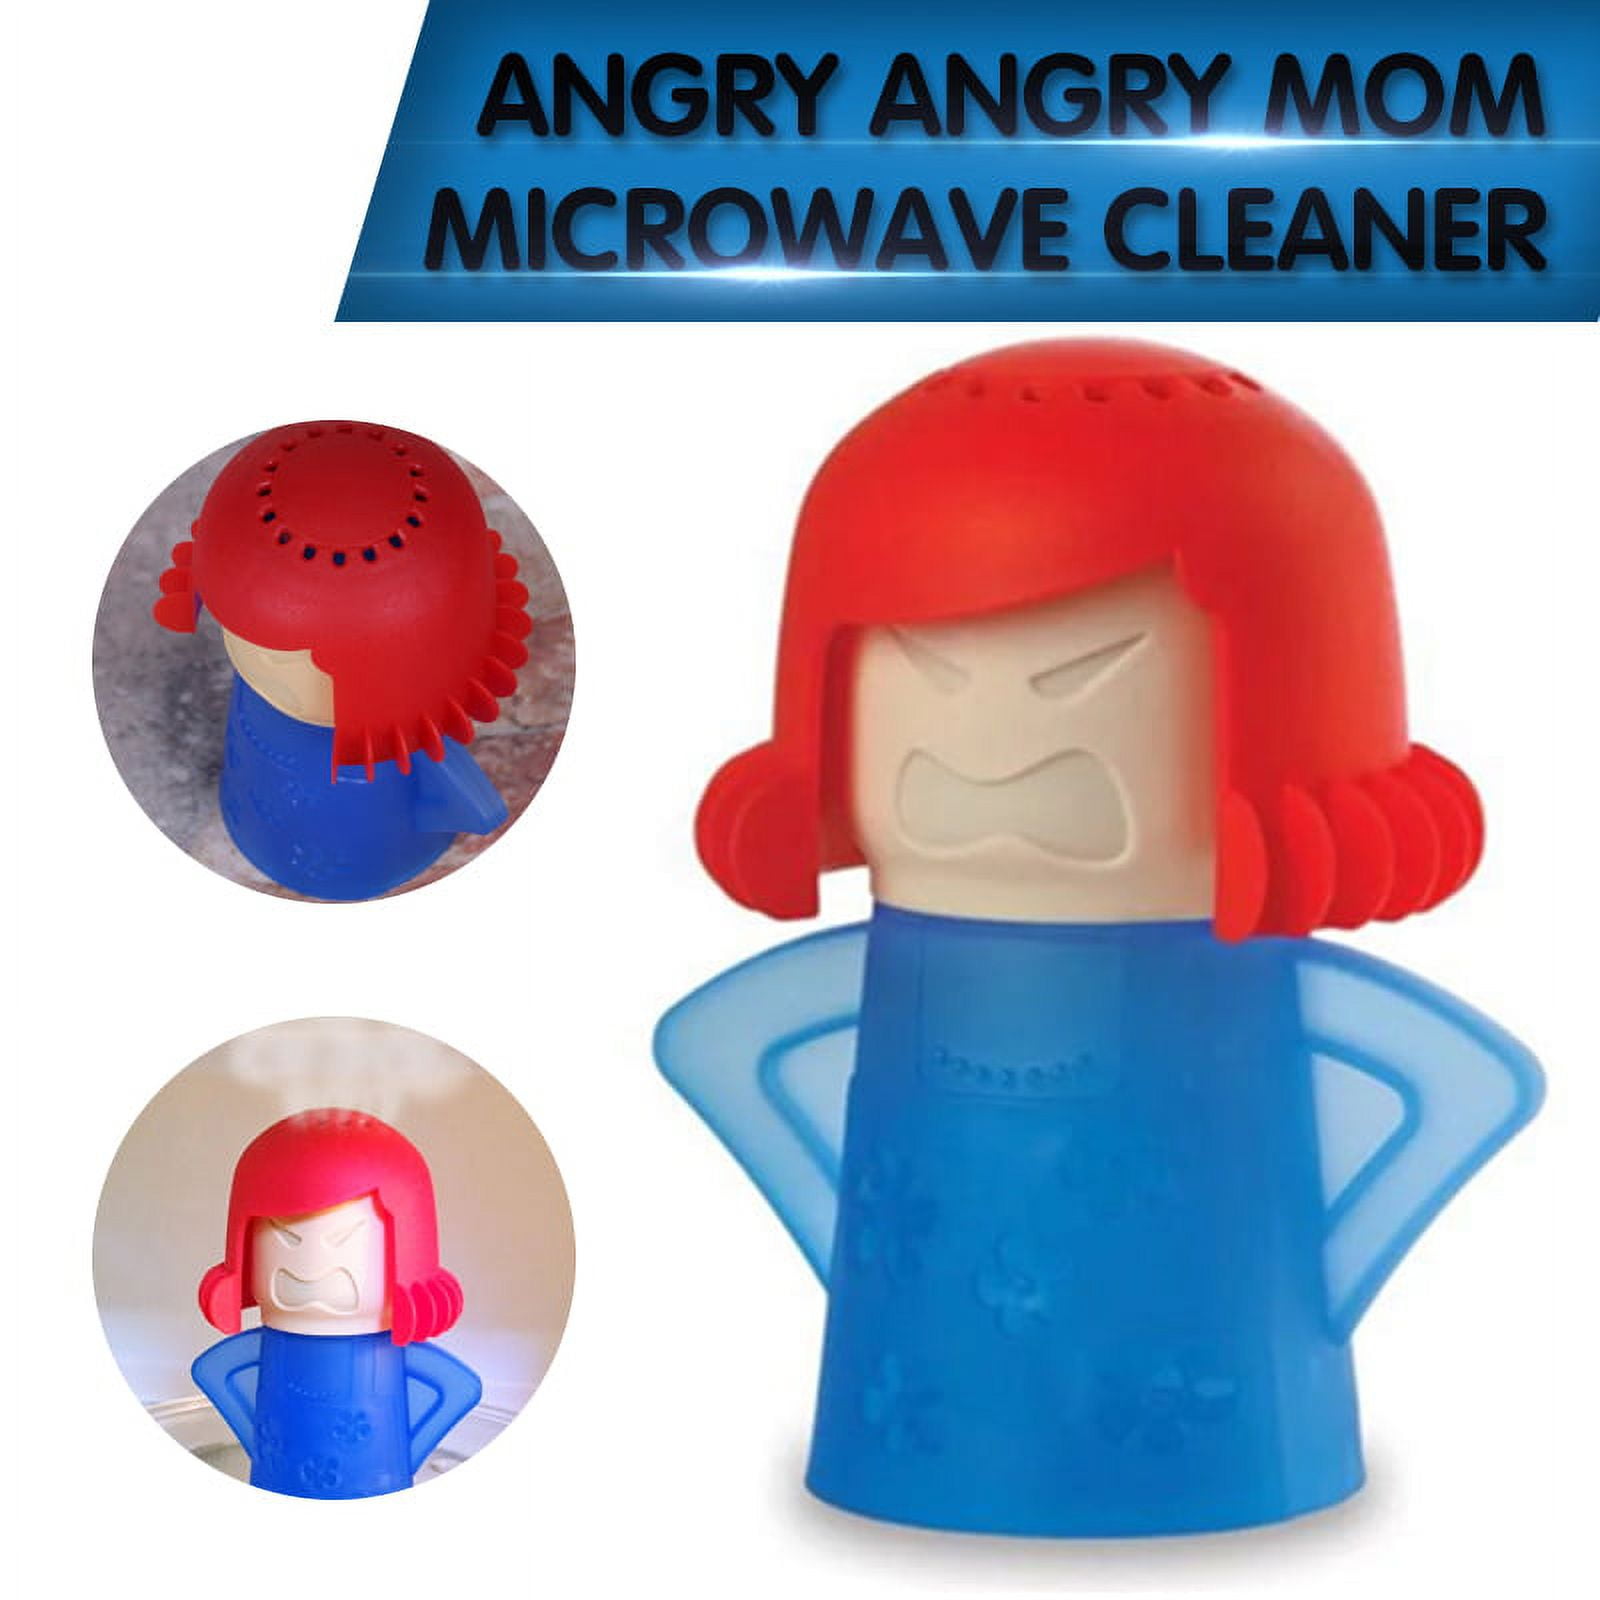 ✓ANGRY MAMA Microwave Cleaner  Easily Cleans Microwave Oven